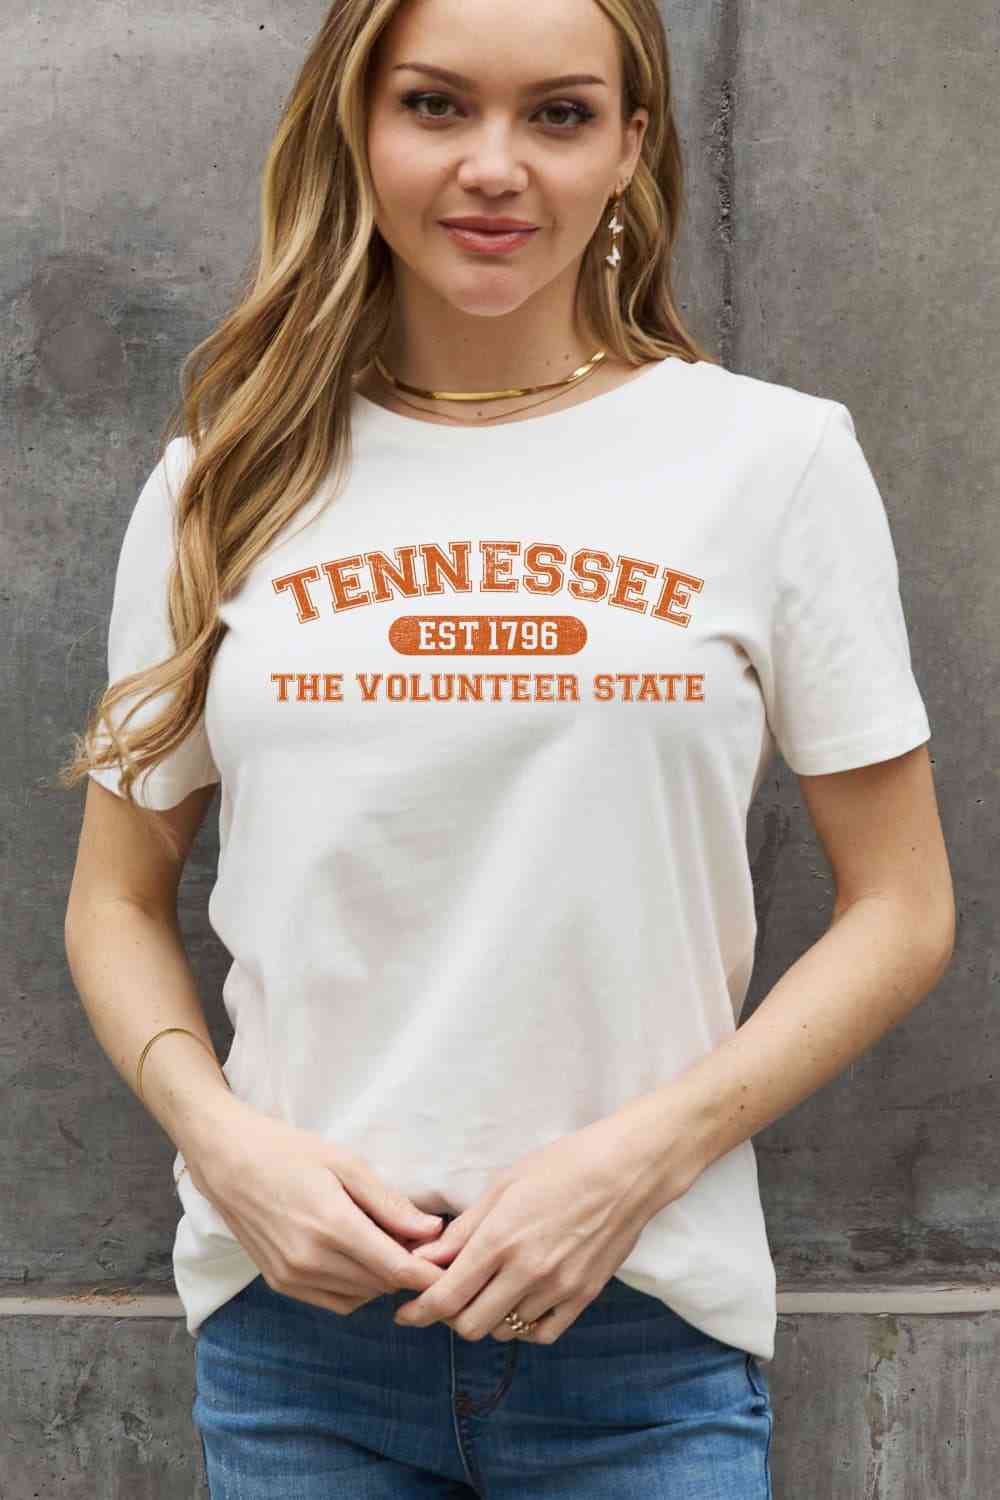 TENNESSEE EST 1796 THE VOLUNTEER STATE Graphic Cotton Tee - Kawaii Stop - 1796 Graphic, Casual Style, Comfortable Fit, Cotton Shirt, Fashionable Comfort, Graphic Tee, Hand Wash Only, Long Length, Premium Quality, Round Neck, Ship From Overseas, Short Sleeves, Show Your Roots, Simply Love, Southern Heritage, T-Shirt, Tennessee Pride, Women's Fashion